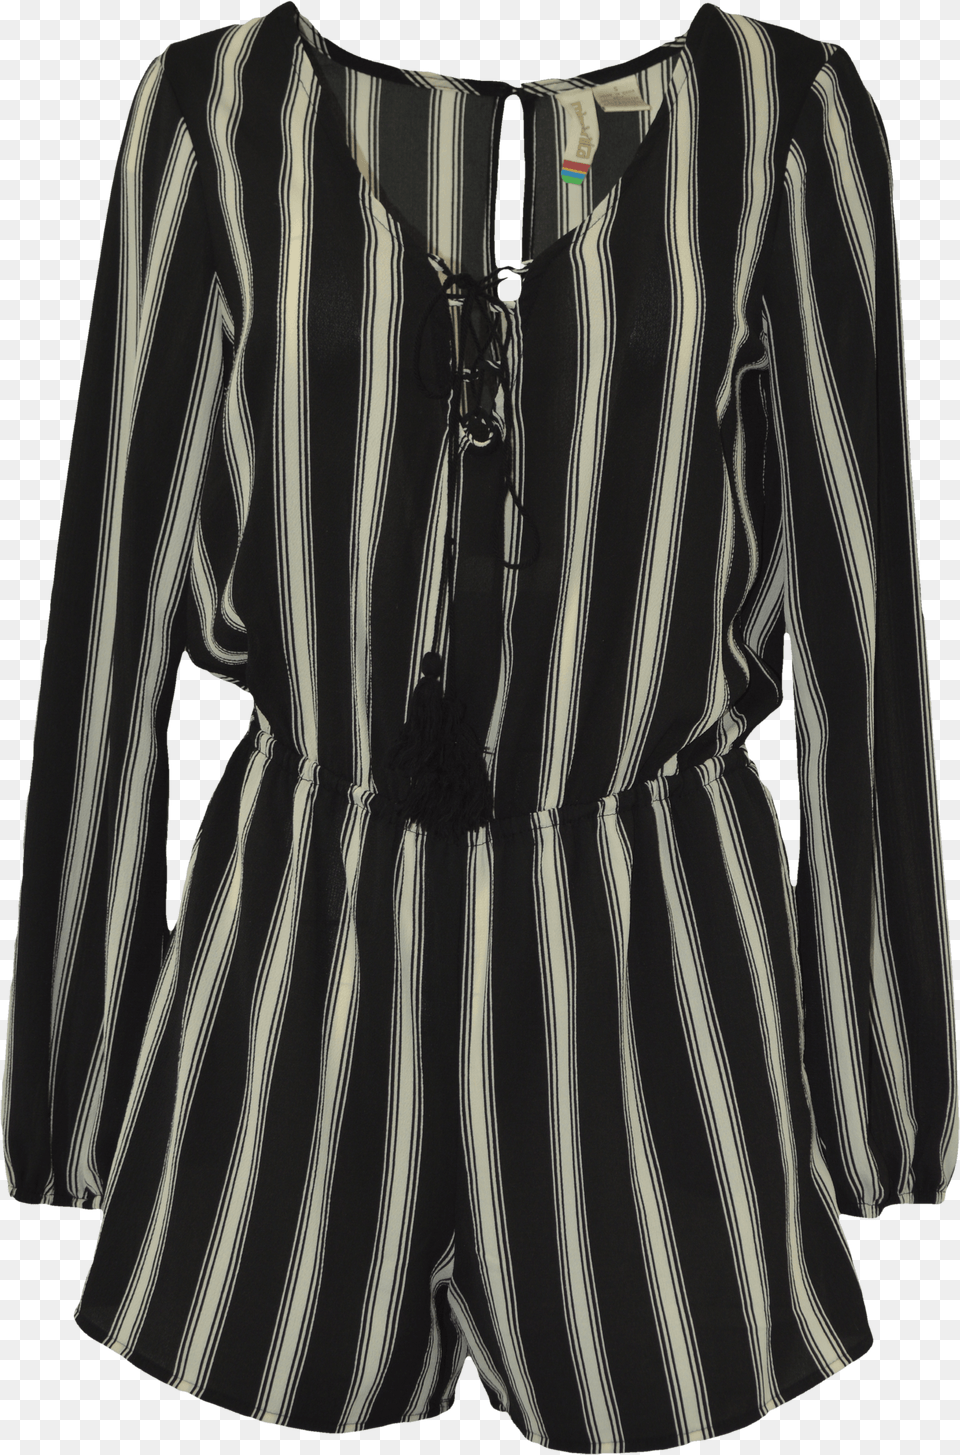 Blouse Png Image